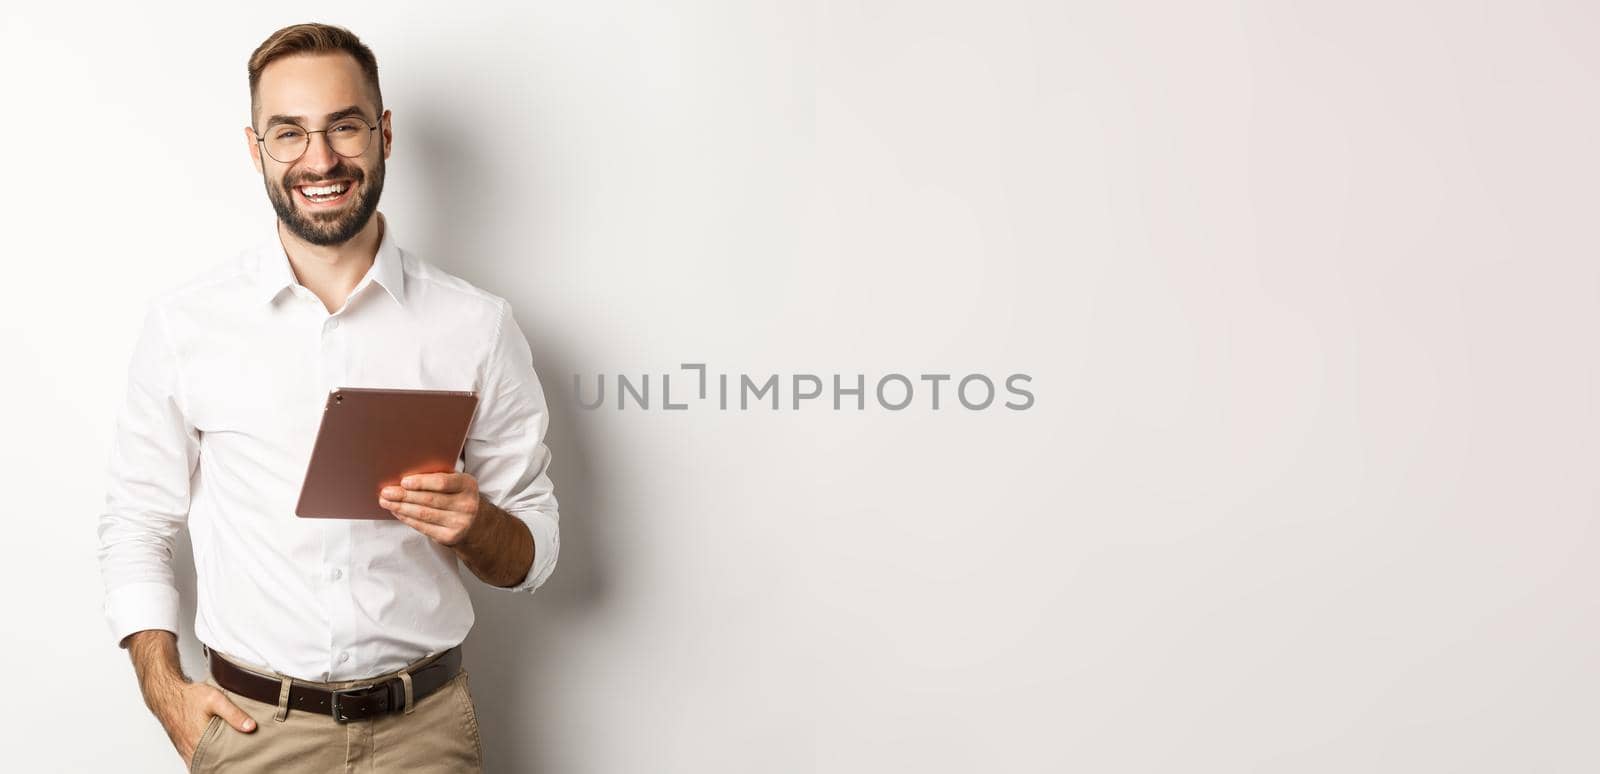 Confident business man holding digital tablet and smiling, standing against white background.